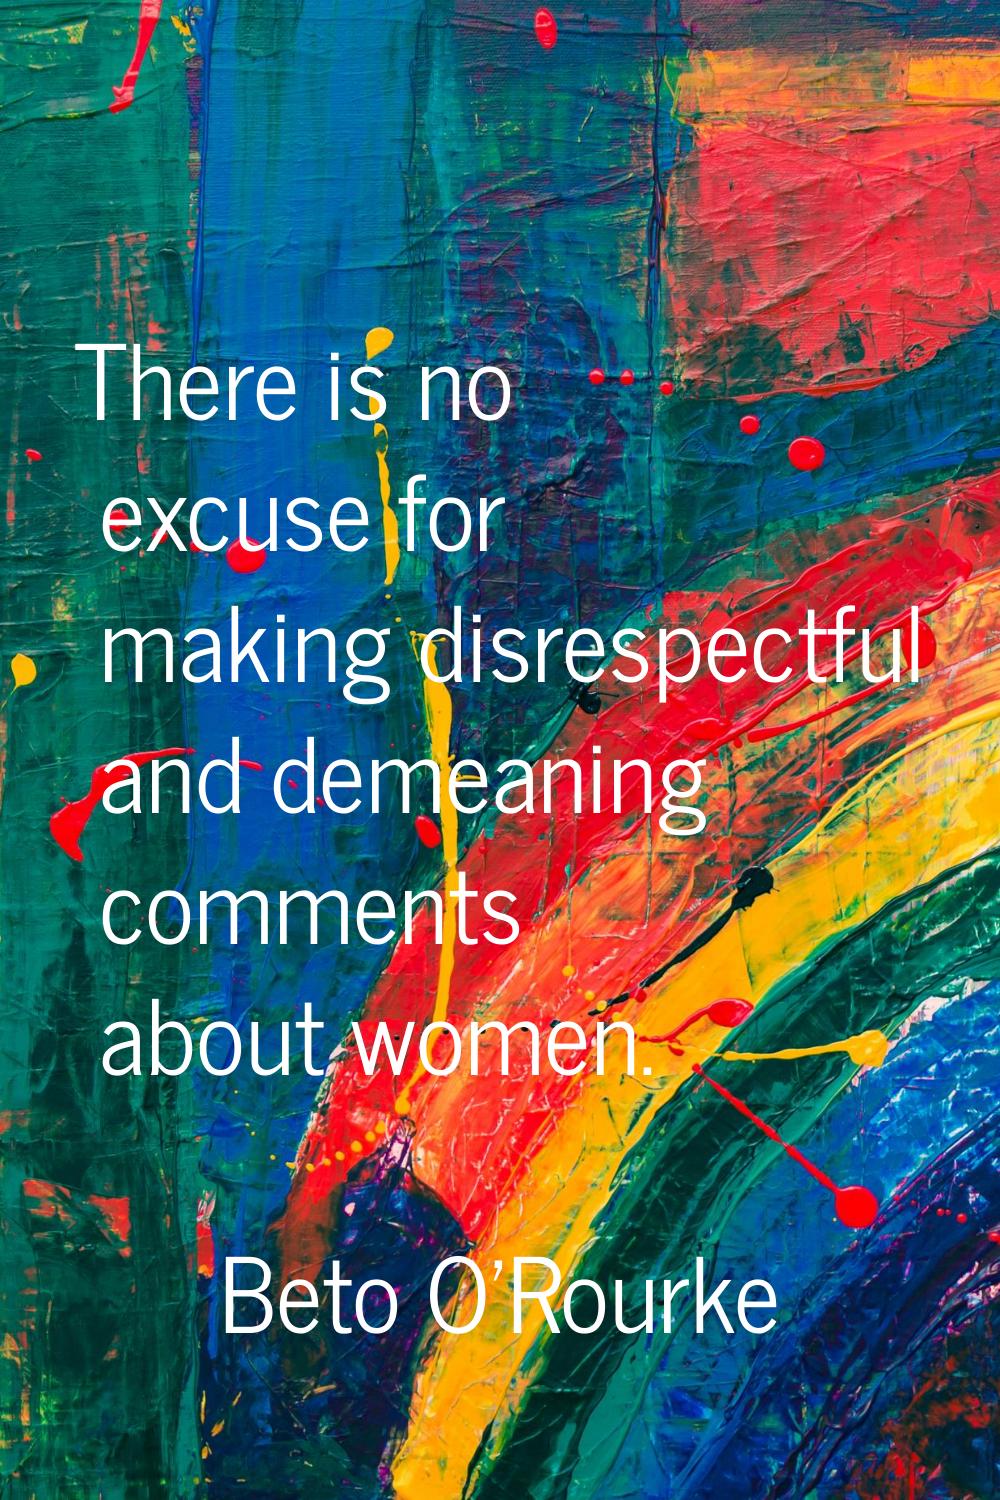 There is no excuse for making disrespectful and demeaning comments about women.